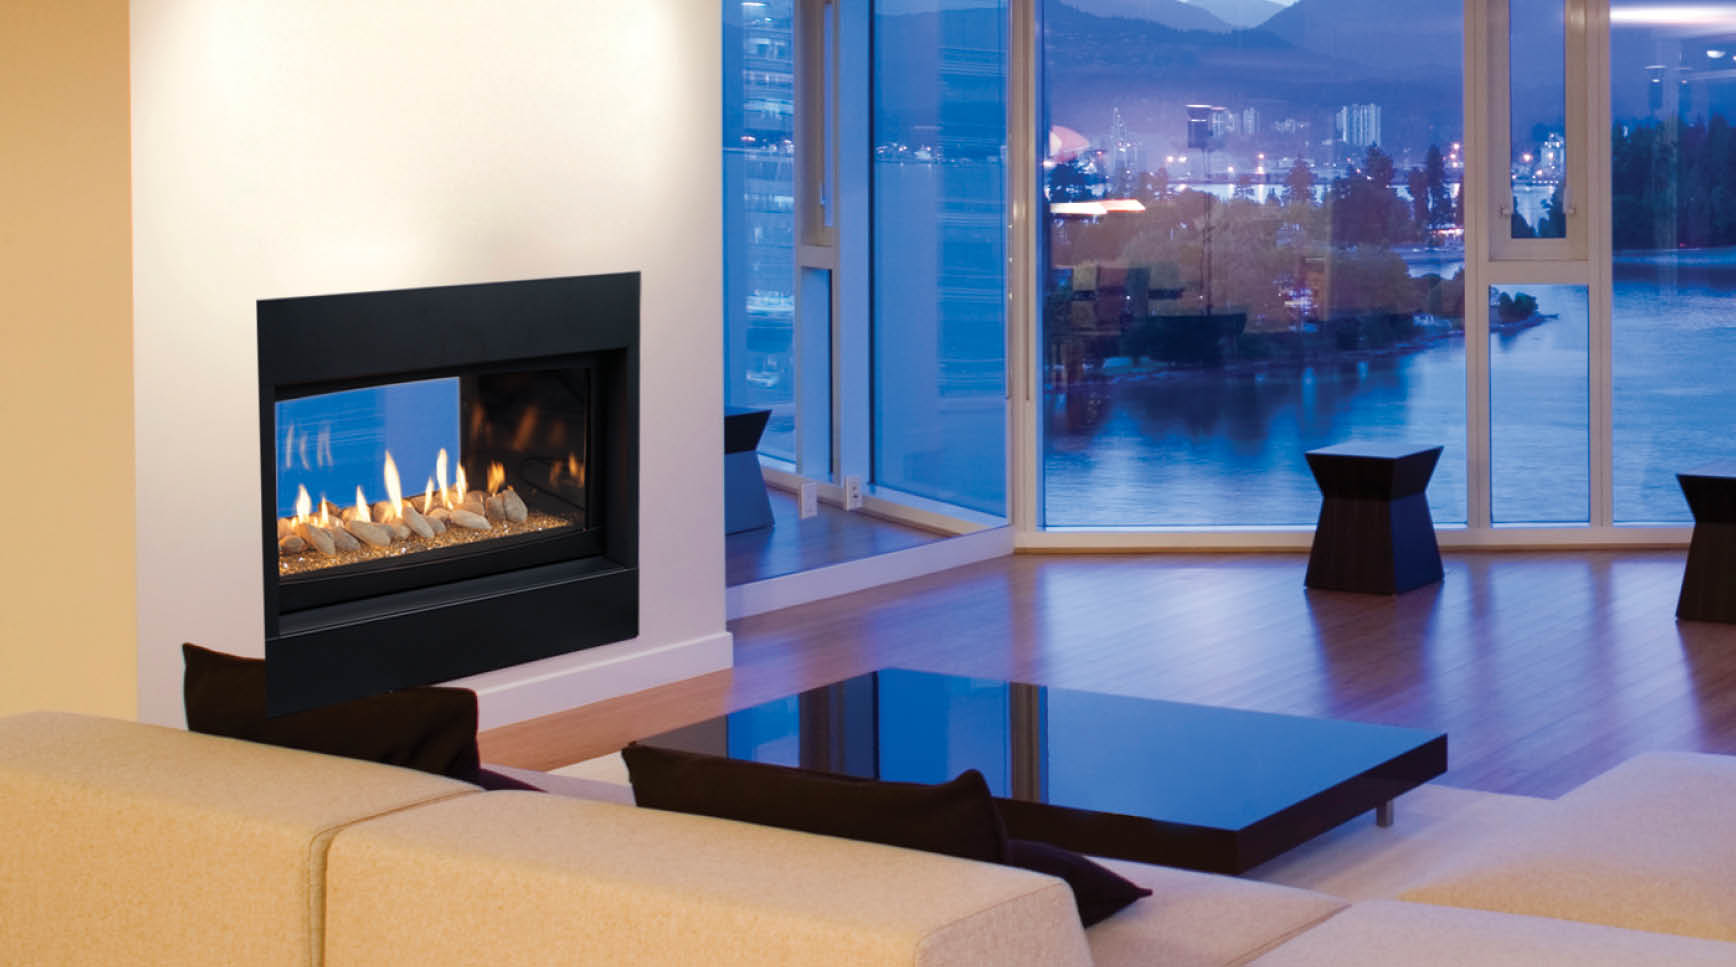 Monessen Serenade See-Thru Direct Vent Gas Fireplace for your home. Our fireplace store has a gas fireplace & more in San Jose